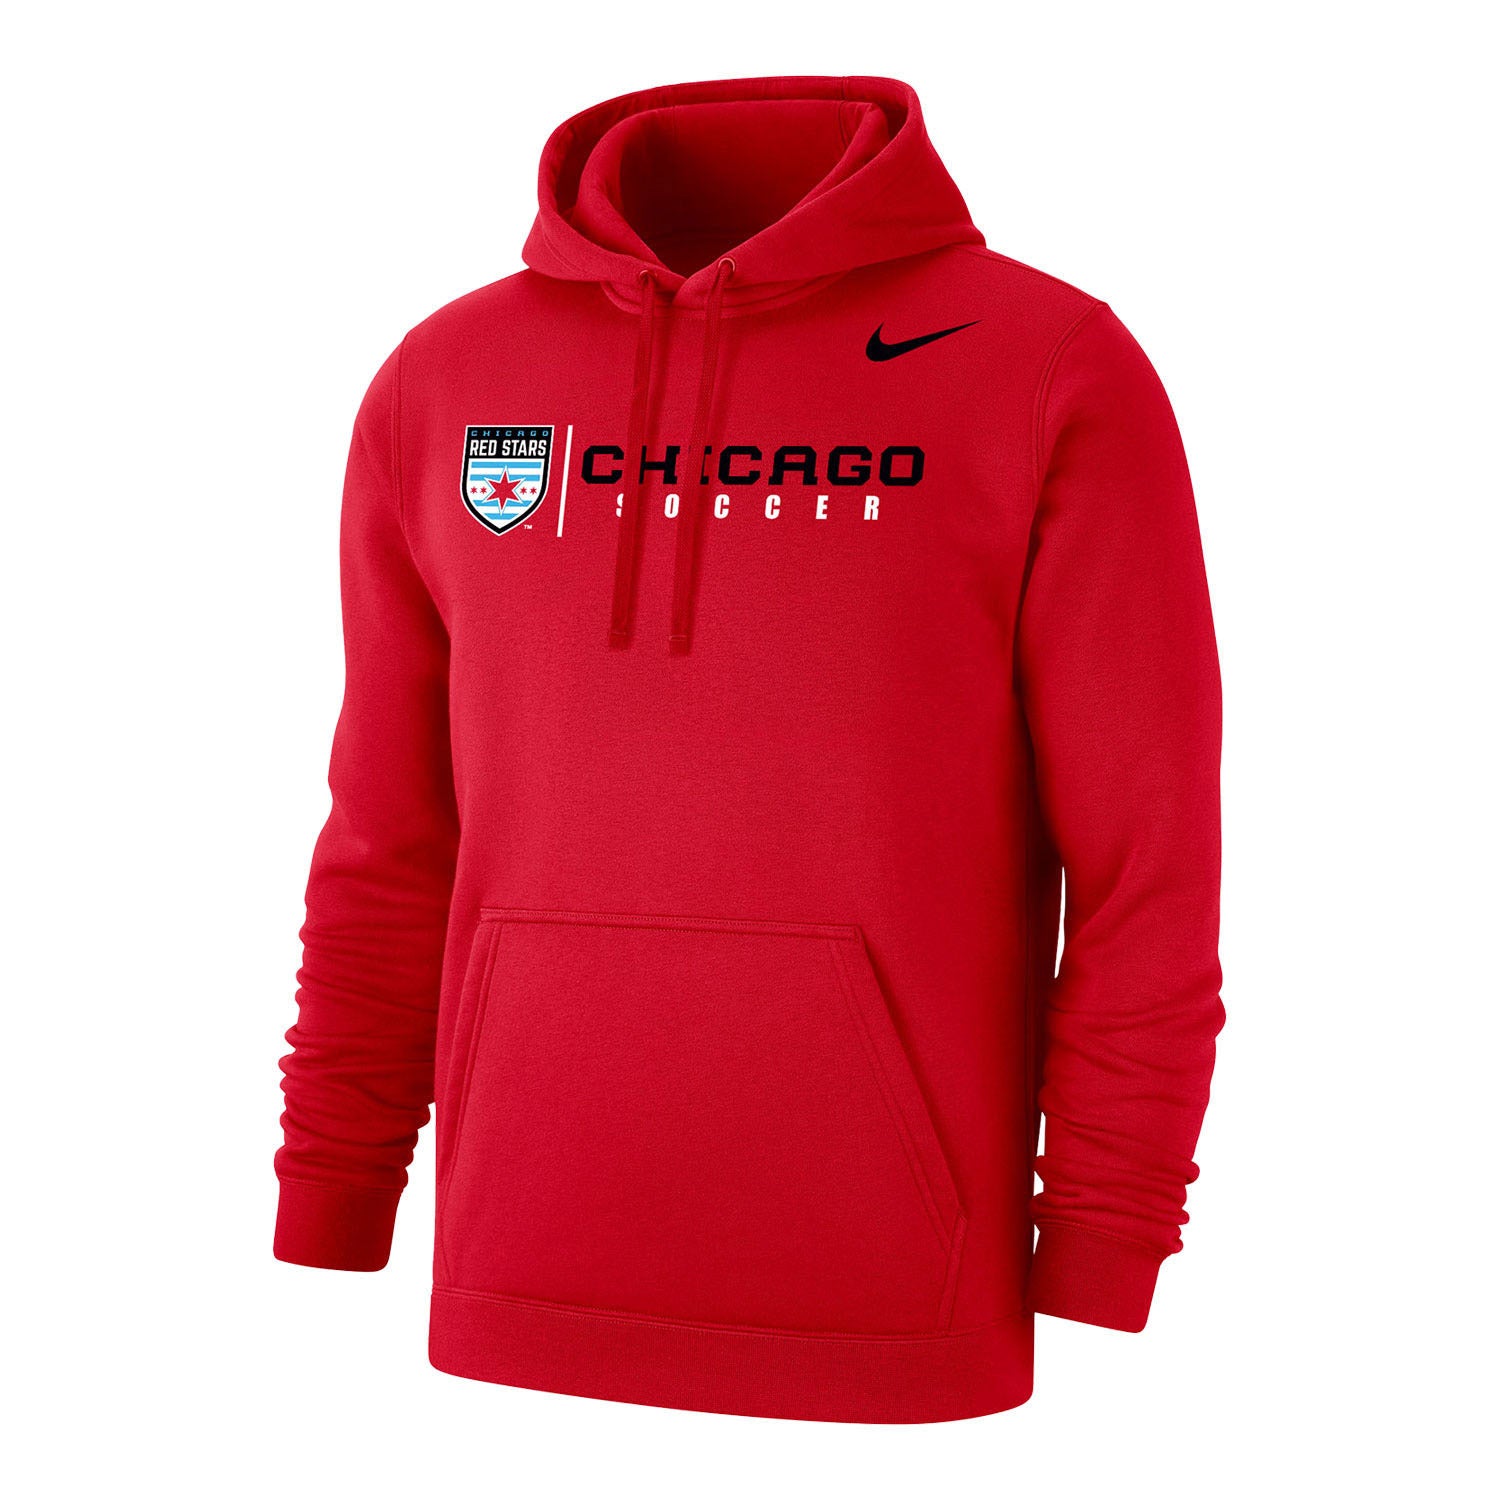 Unisex Nike Red Stars Combo Red Hoodie | NWSL Shop